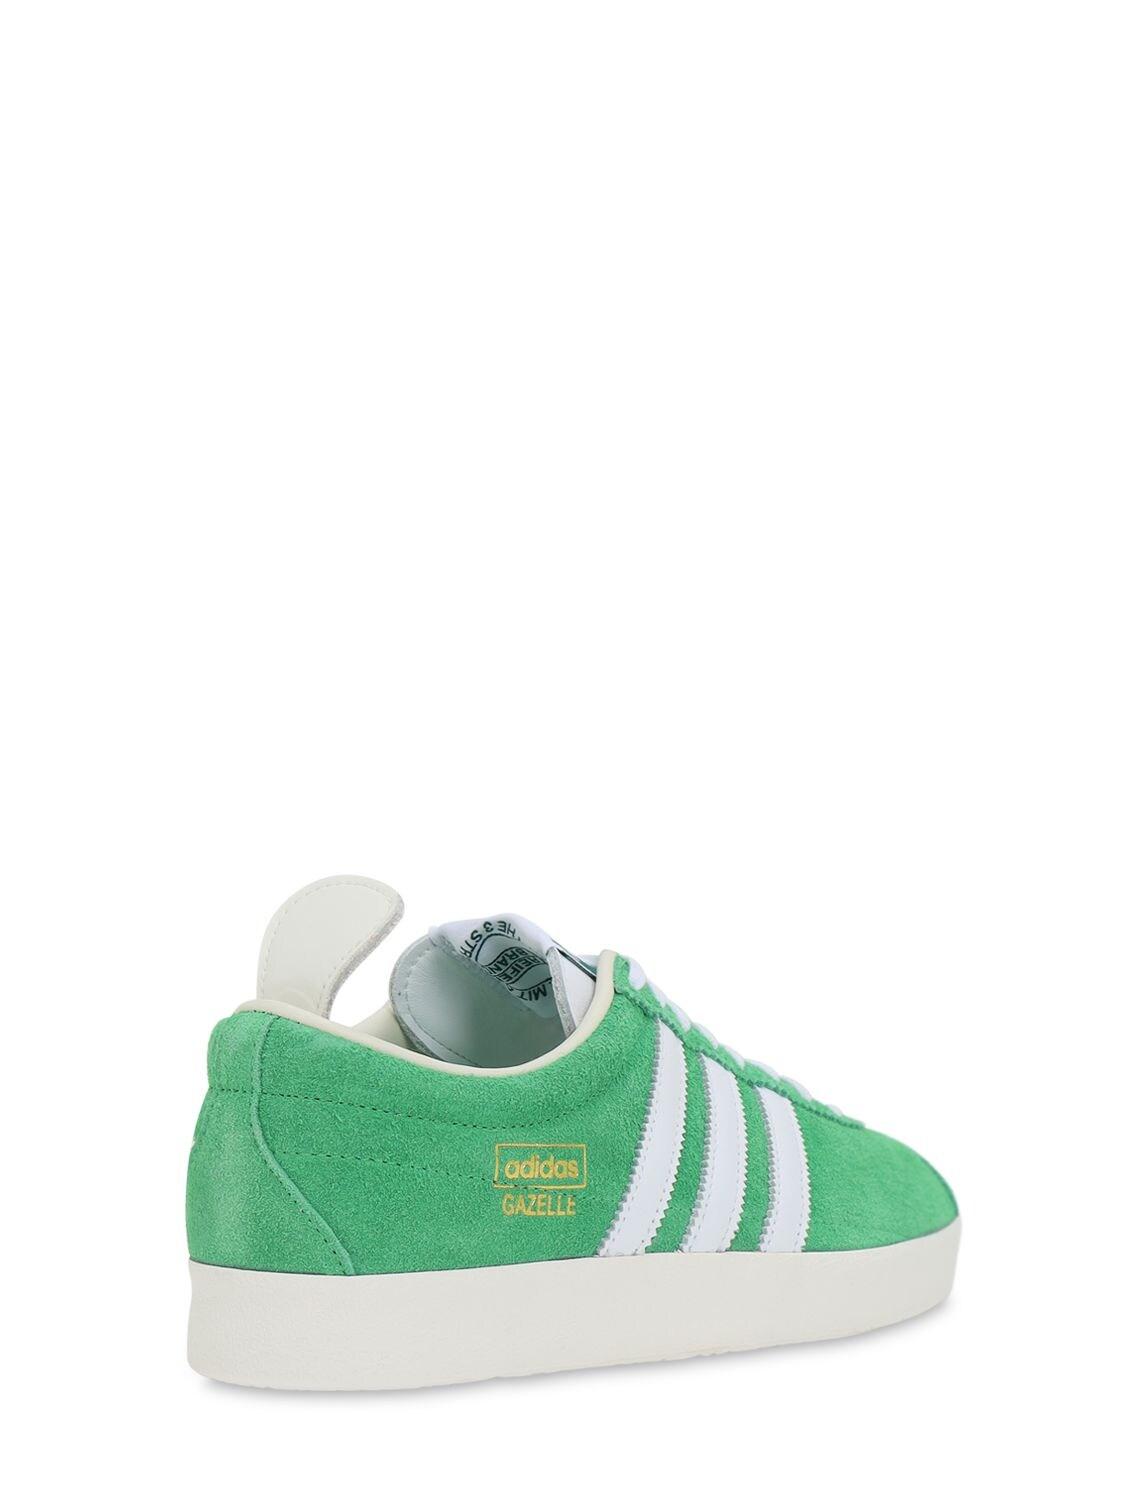 adidas Originals Lace Gazelle Vintage Trainers in Lime Green (Green) for  Men - Lyst